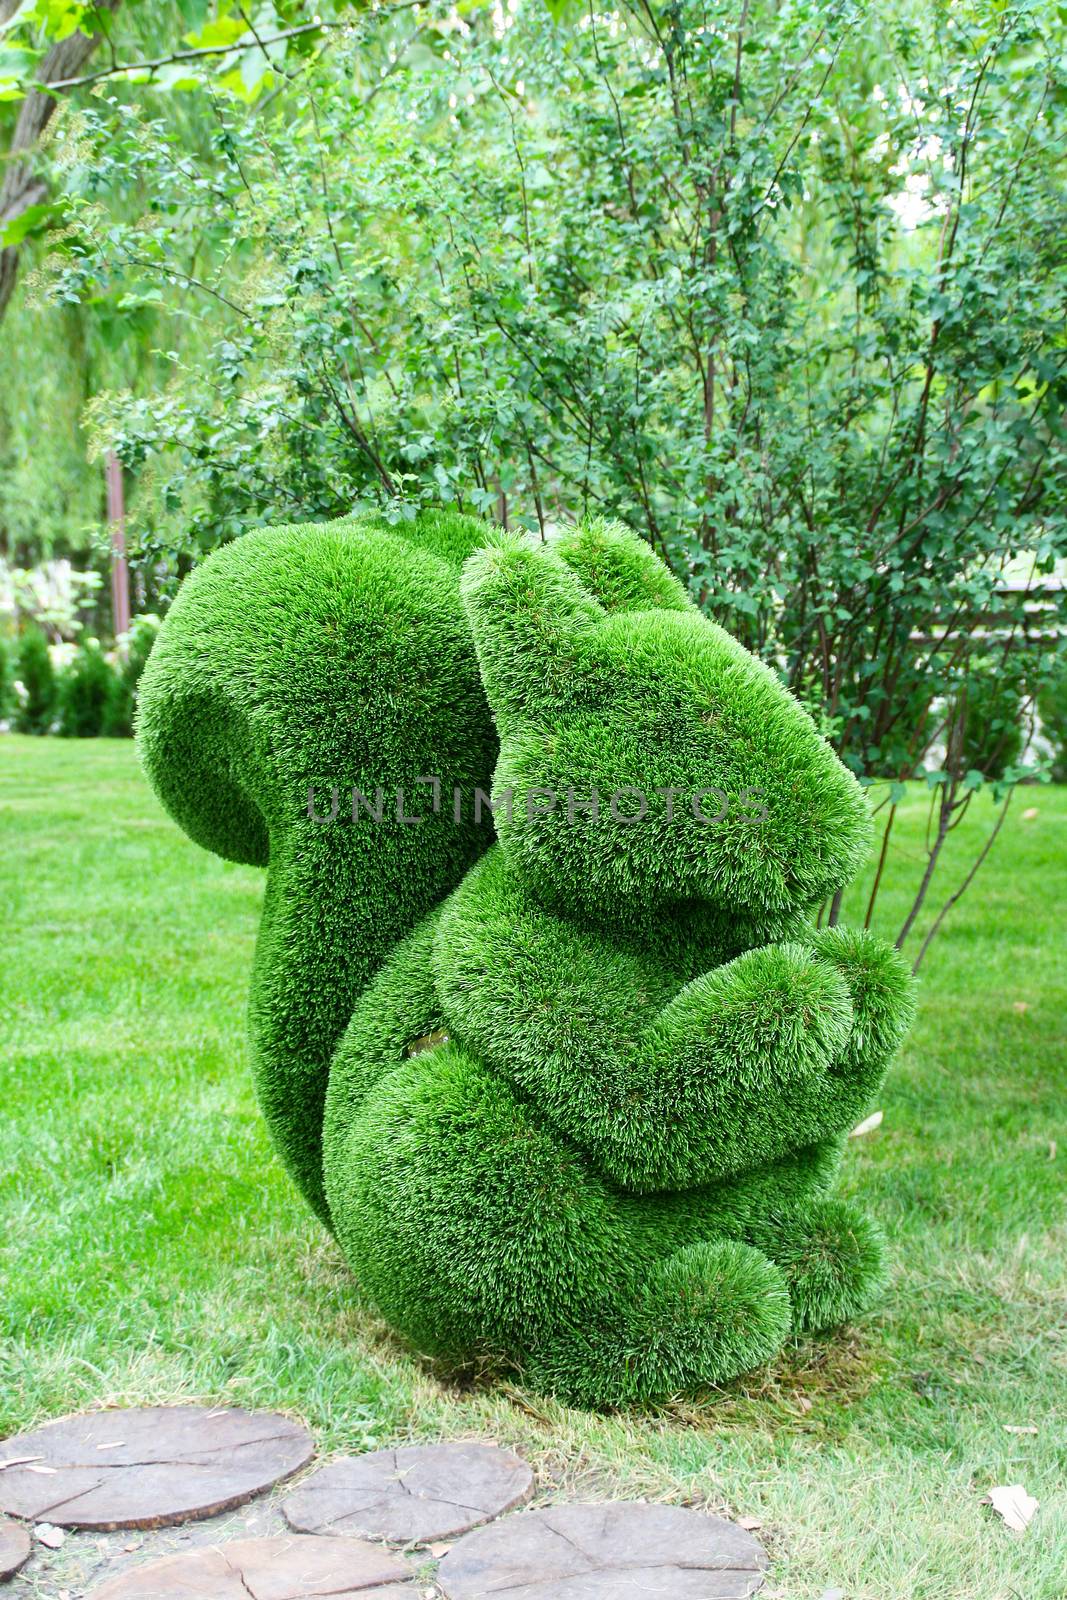 Pictures green squirrel made of artificial grass green against the background of trees.